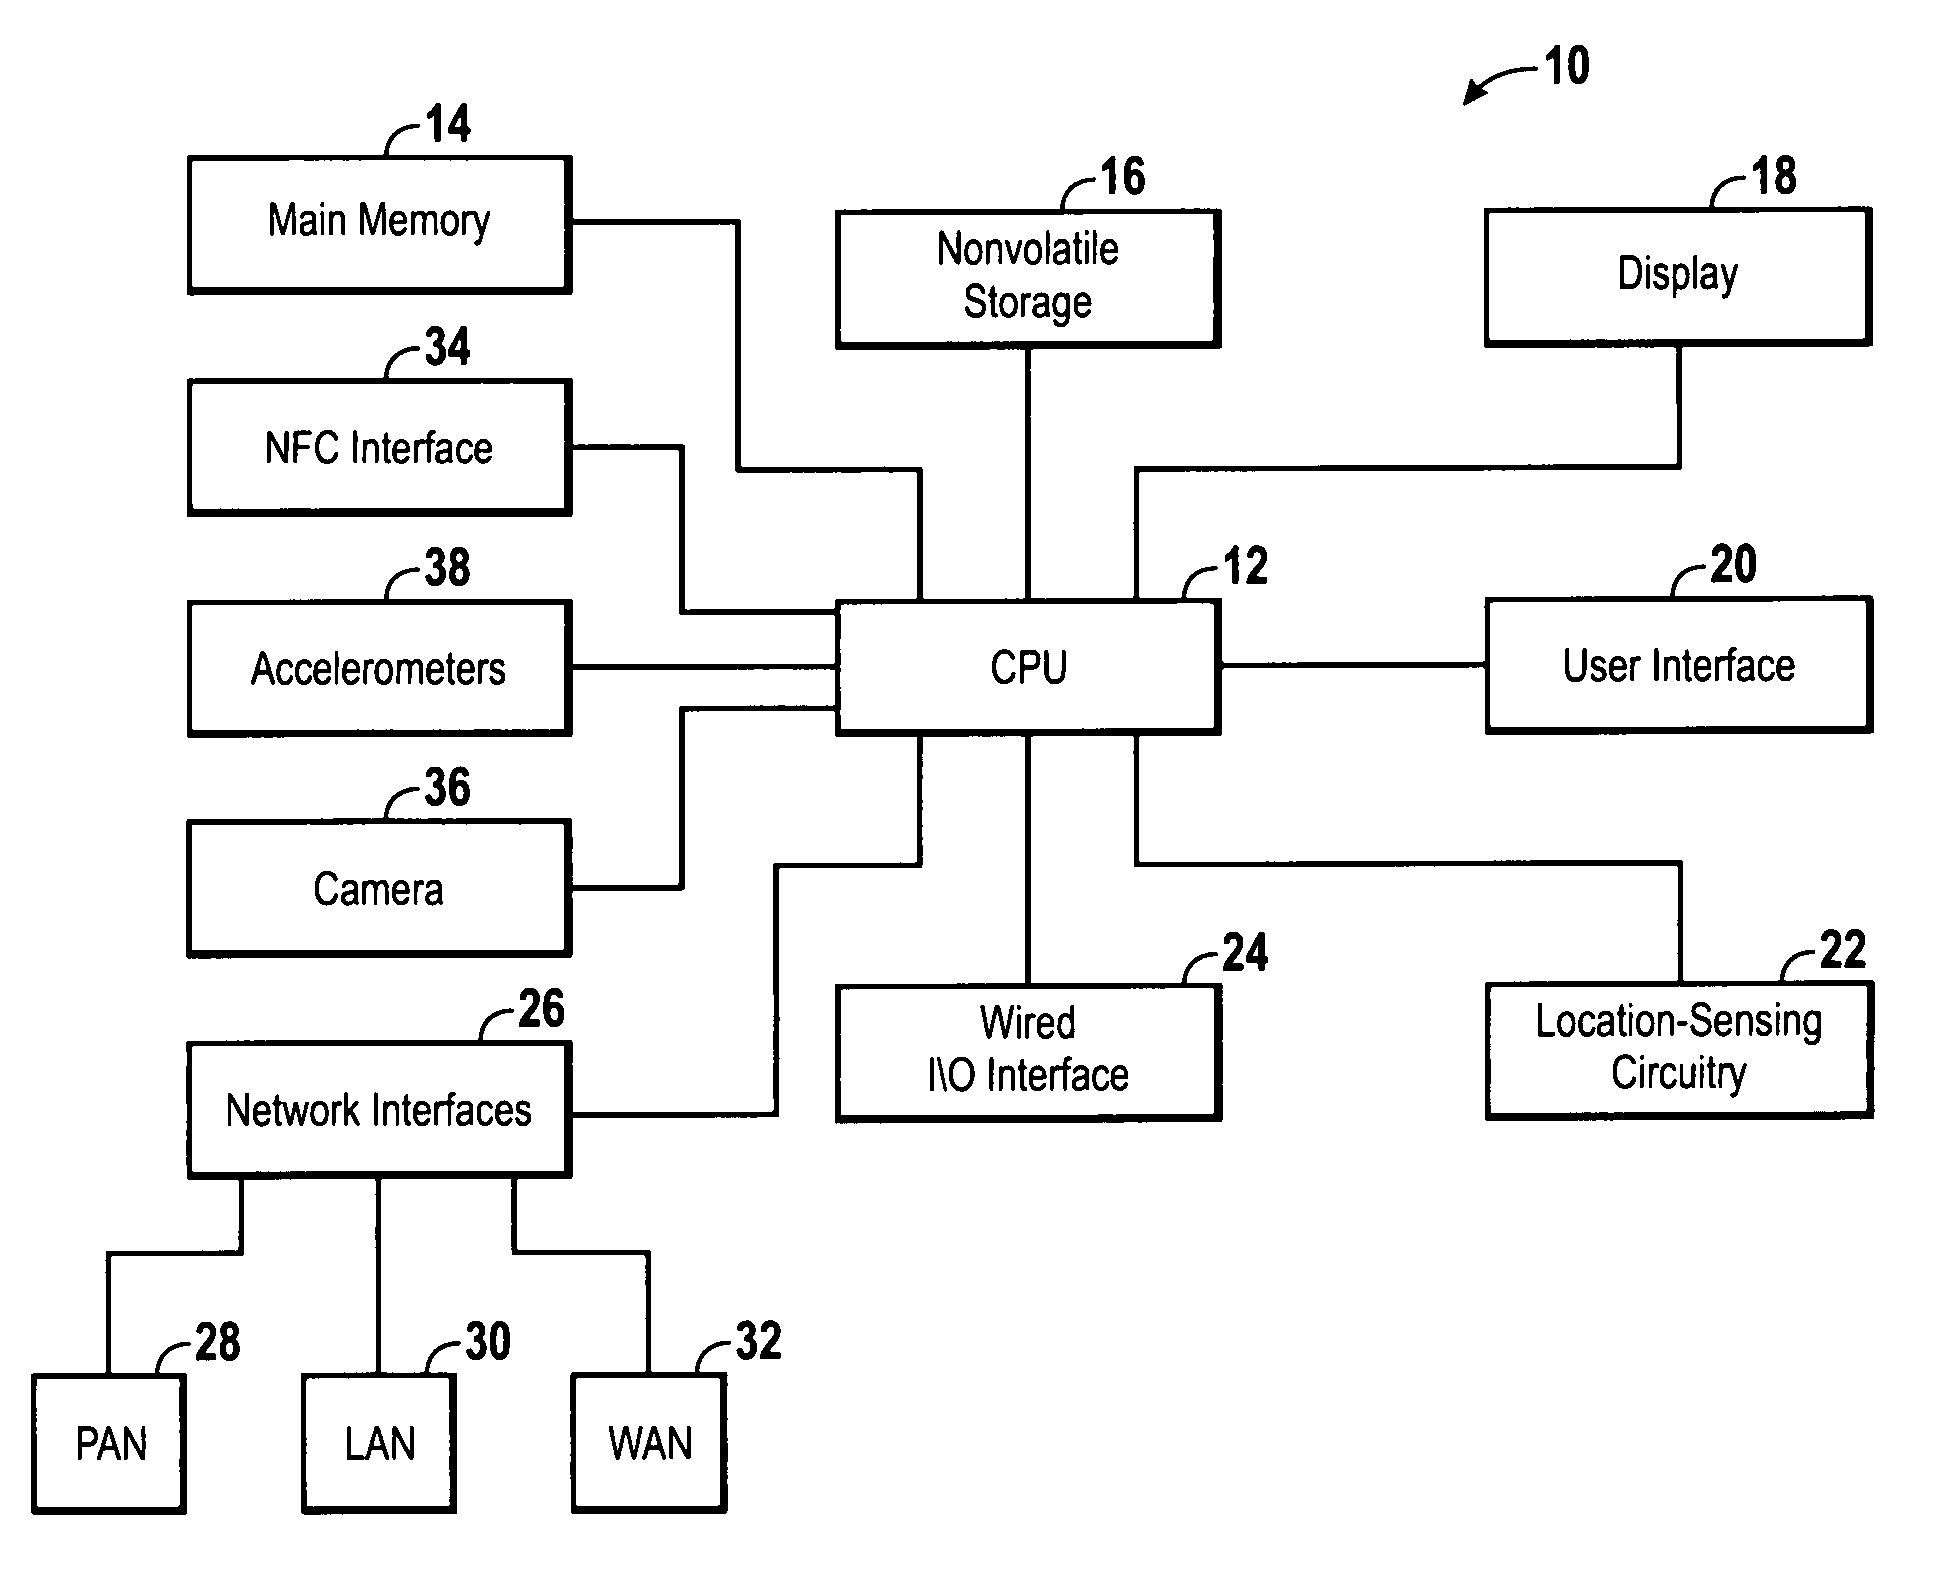 System and method for transportation check-in